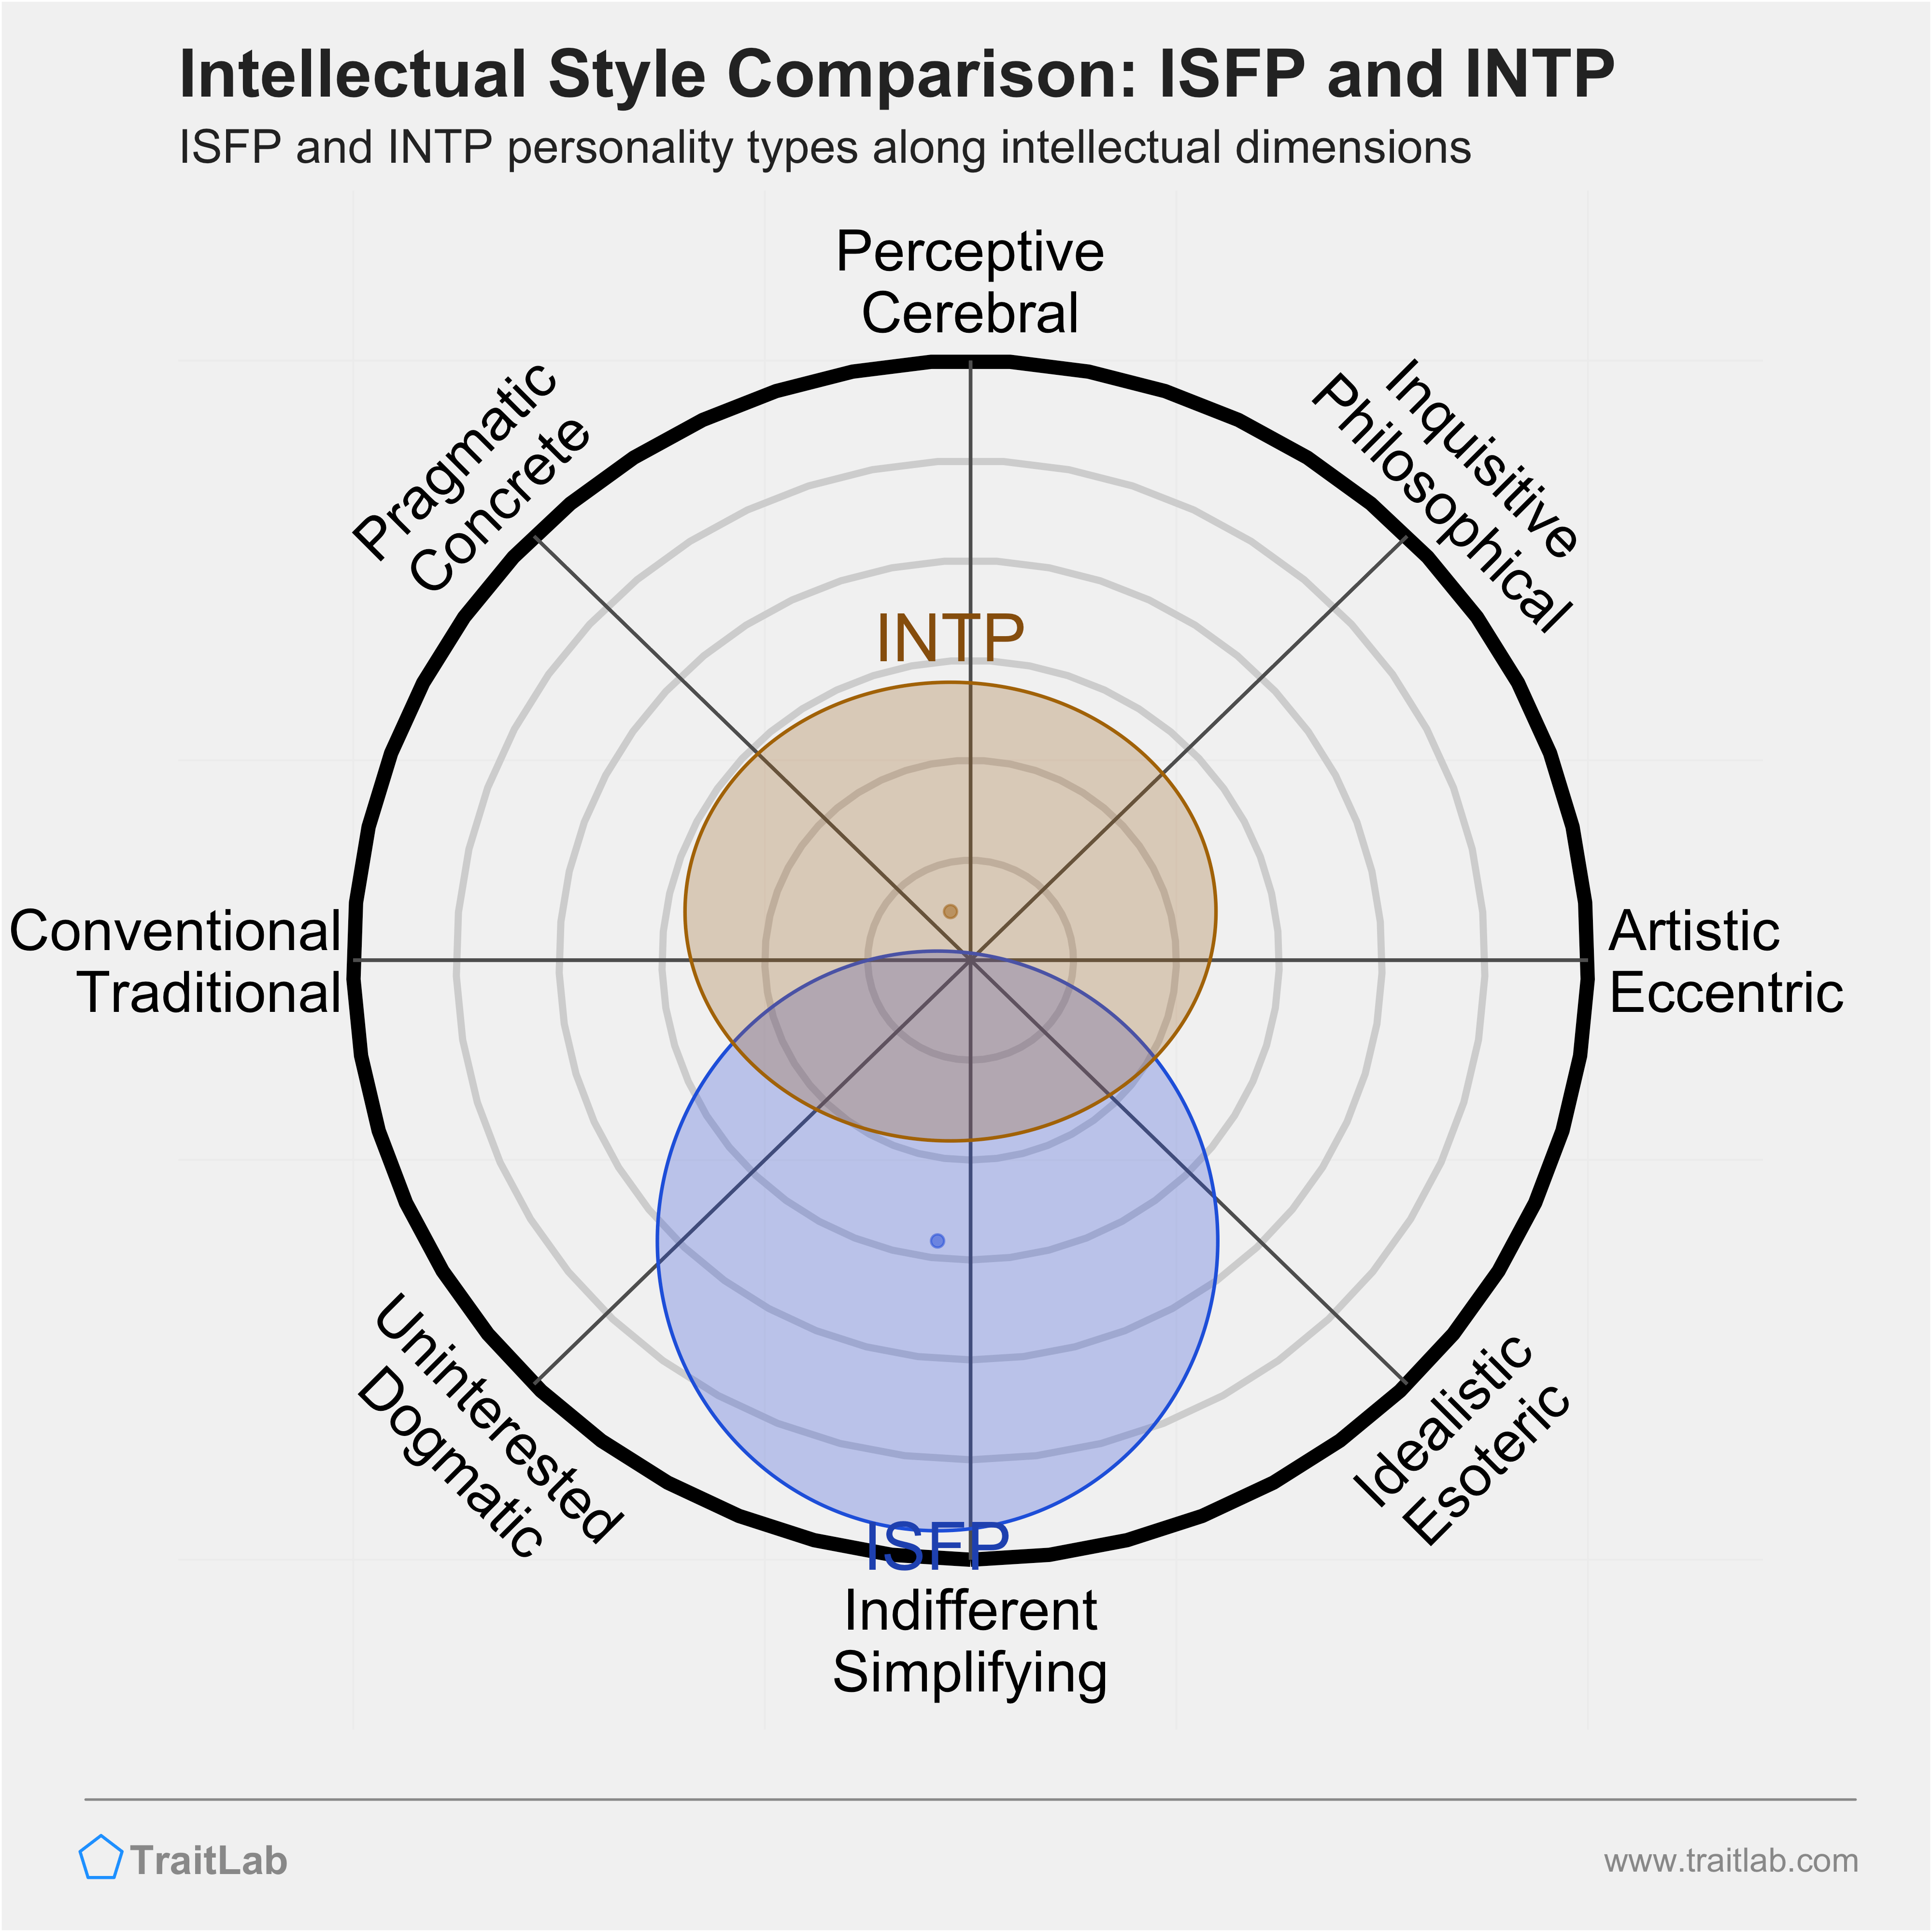 ISFP and INTP comparison across intellectual dimensions